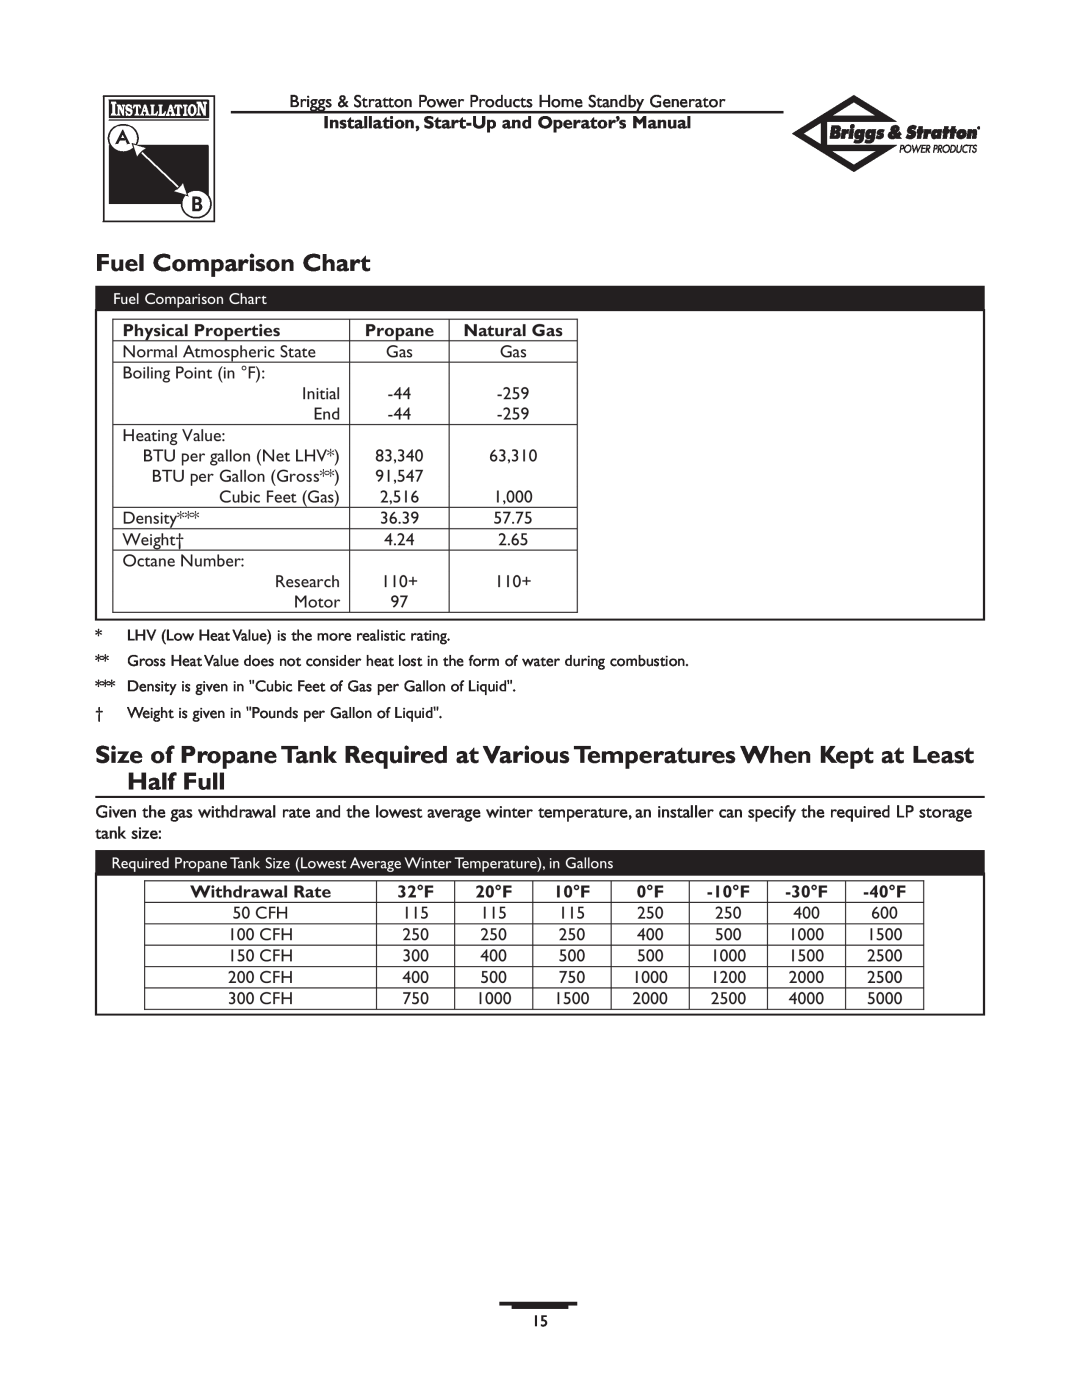 Briggs & Stratton 01897-0 manual Fuel Comparison Chart, Physical Properties, Propane, Natural Gas, Withdrawal Rate 